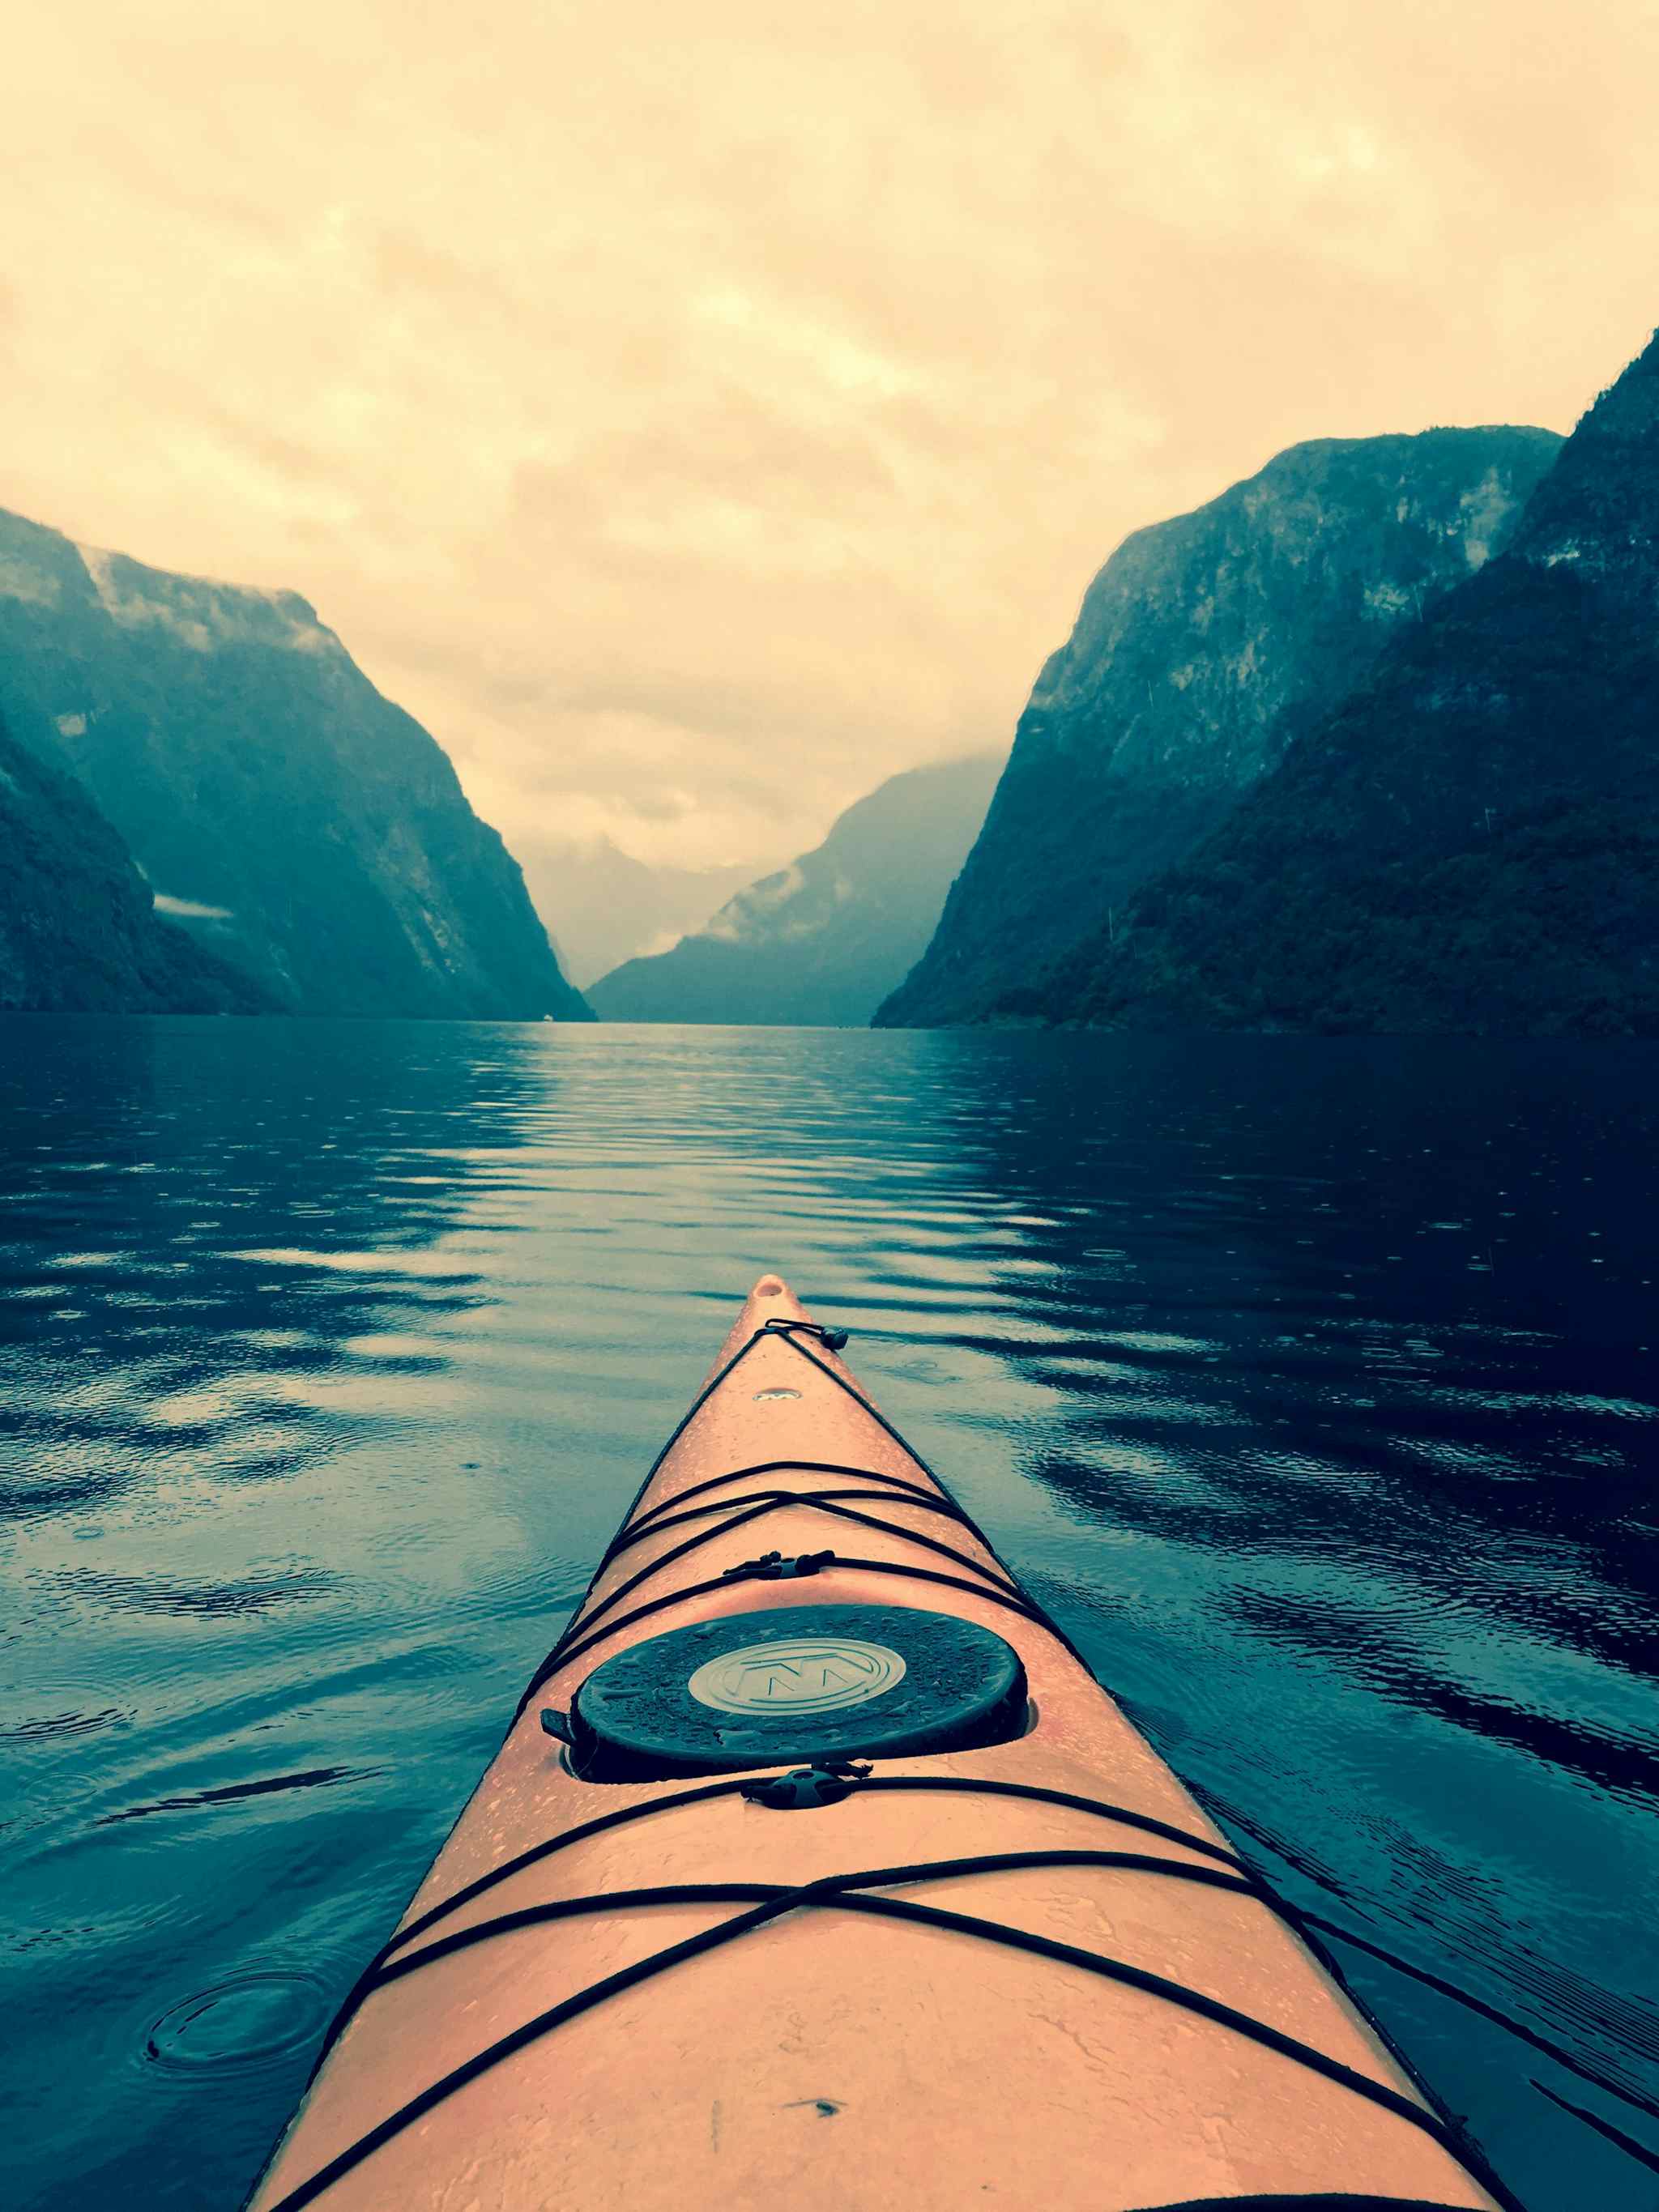 Kayaking in the Norwegian Fjords: a Love Story